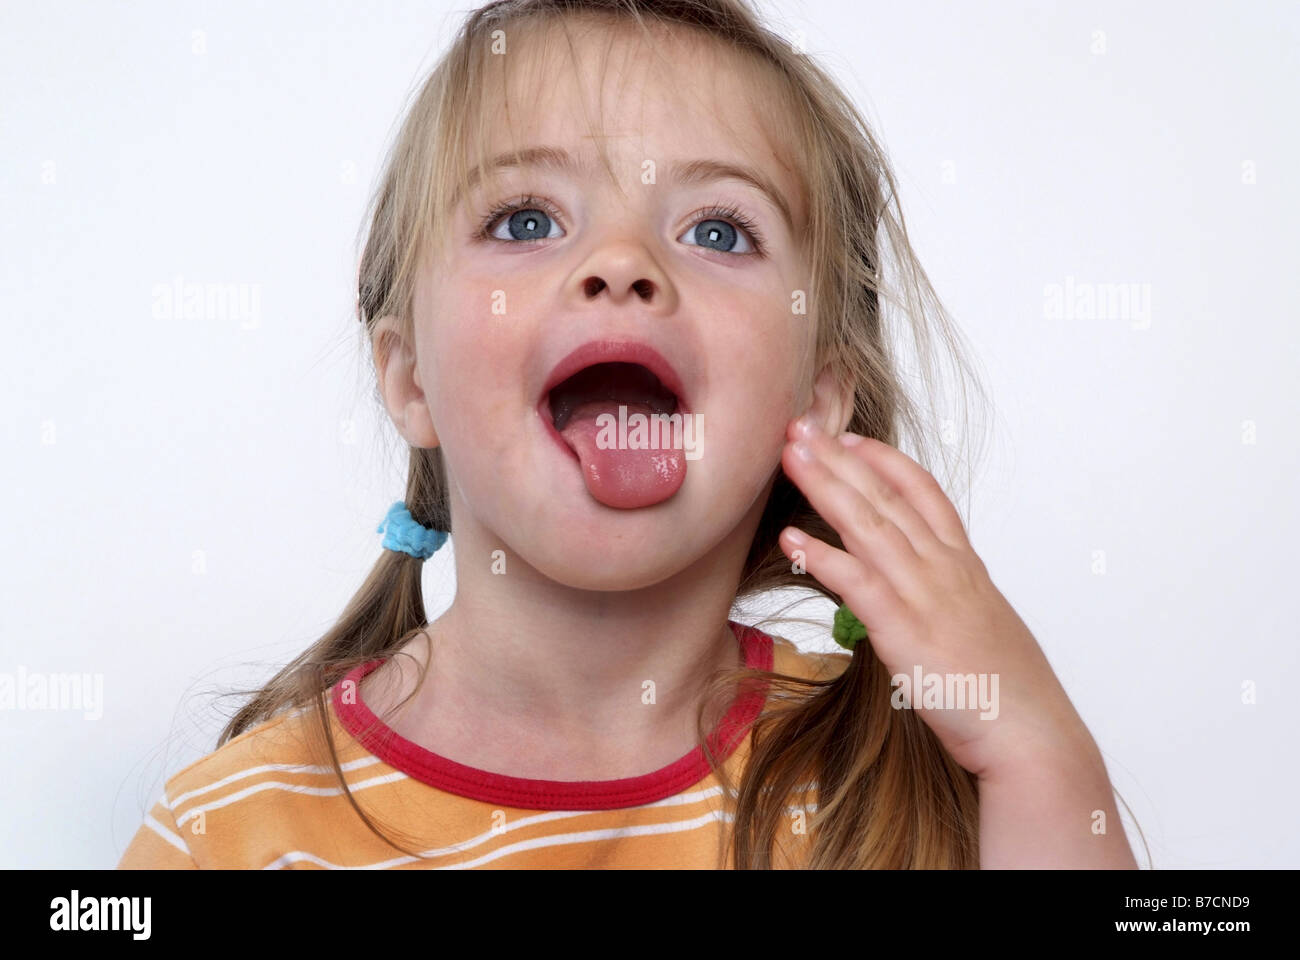 small blond girl making faces Stock Photo